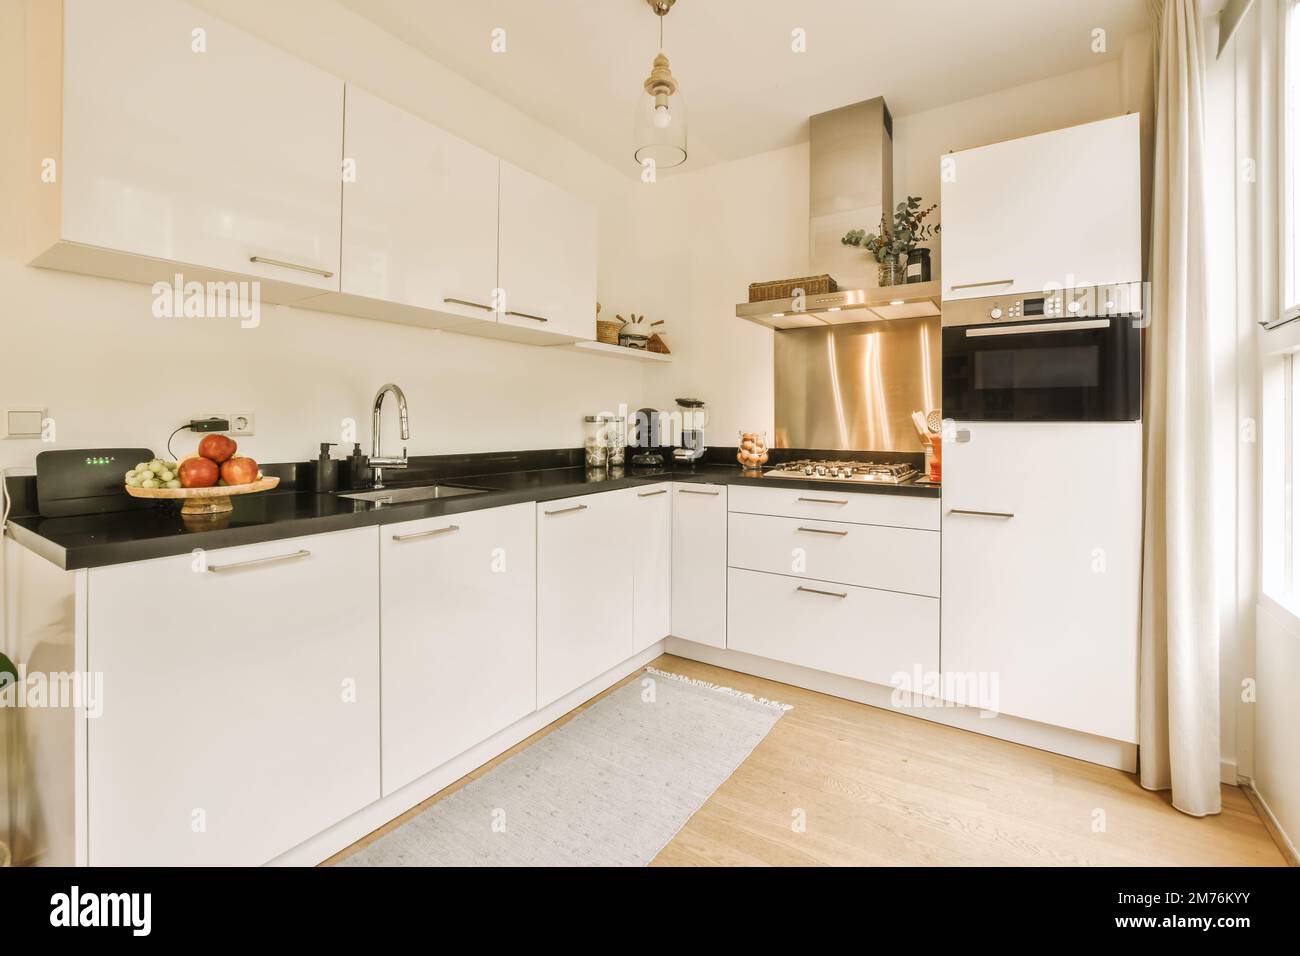 a kitchen with white cupboards and black counter tops on the counters in this room is very clean, but it's not Stock Photo